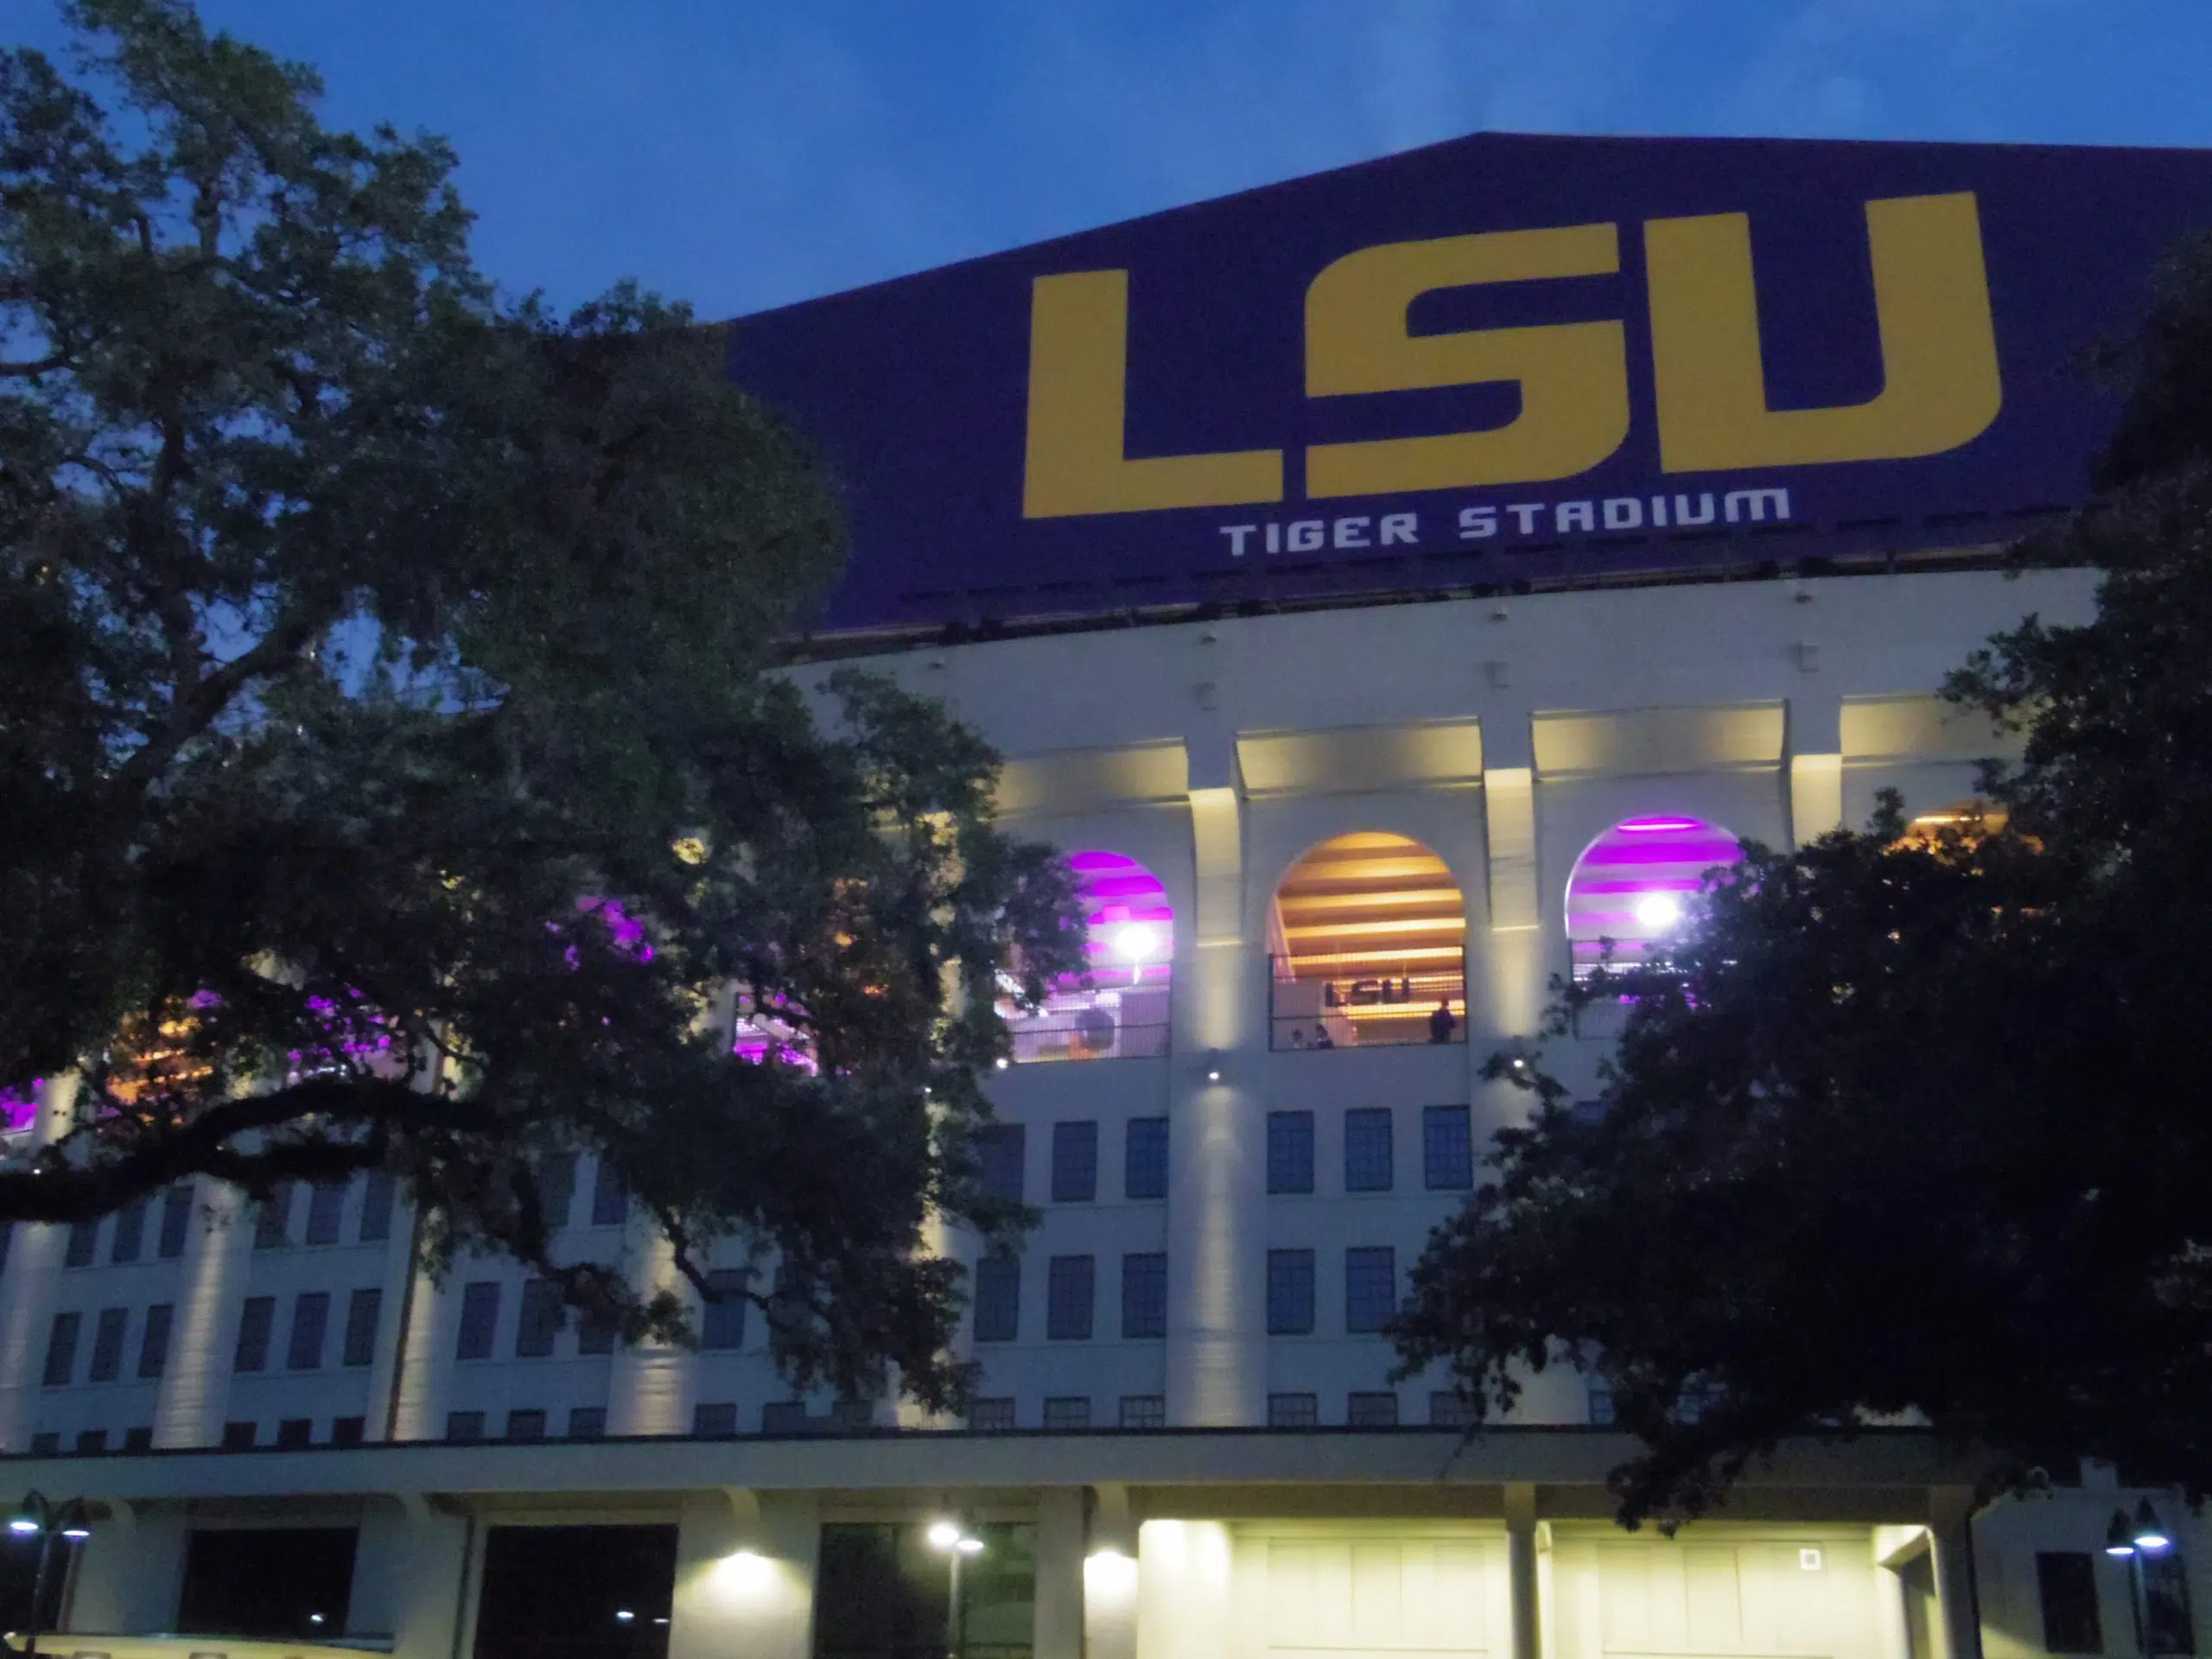 Legislative auditor's report shows LSU athletics finished the 2021 fiscal year with a nearly 10-million dollar deficit